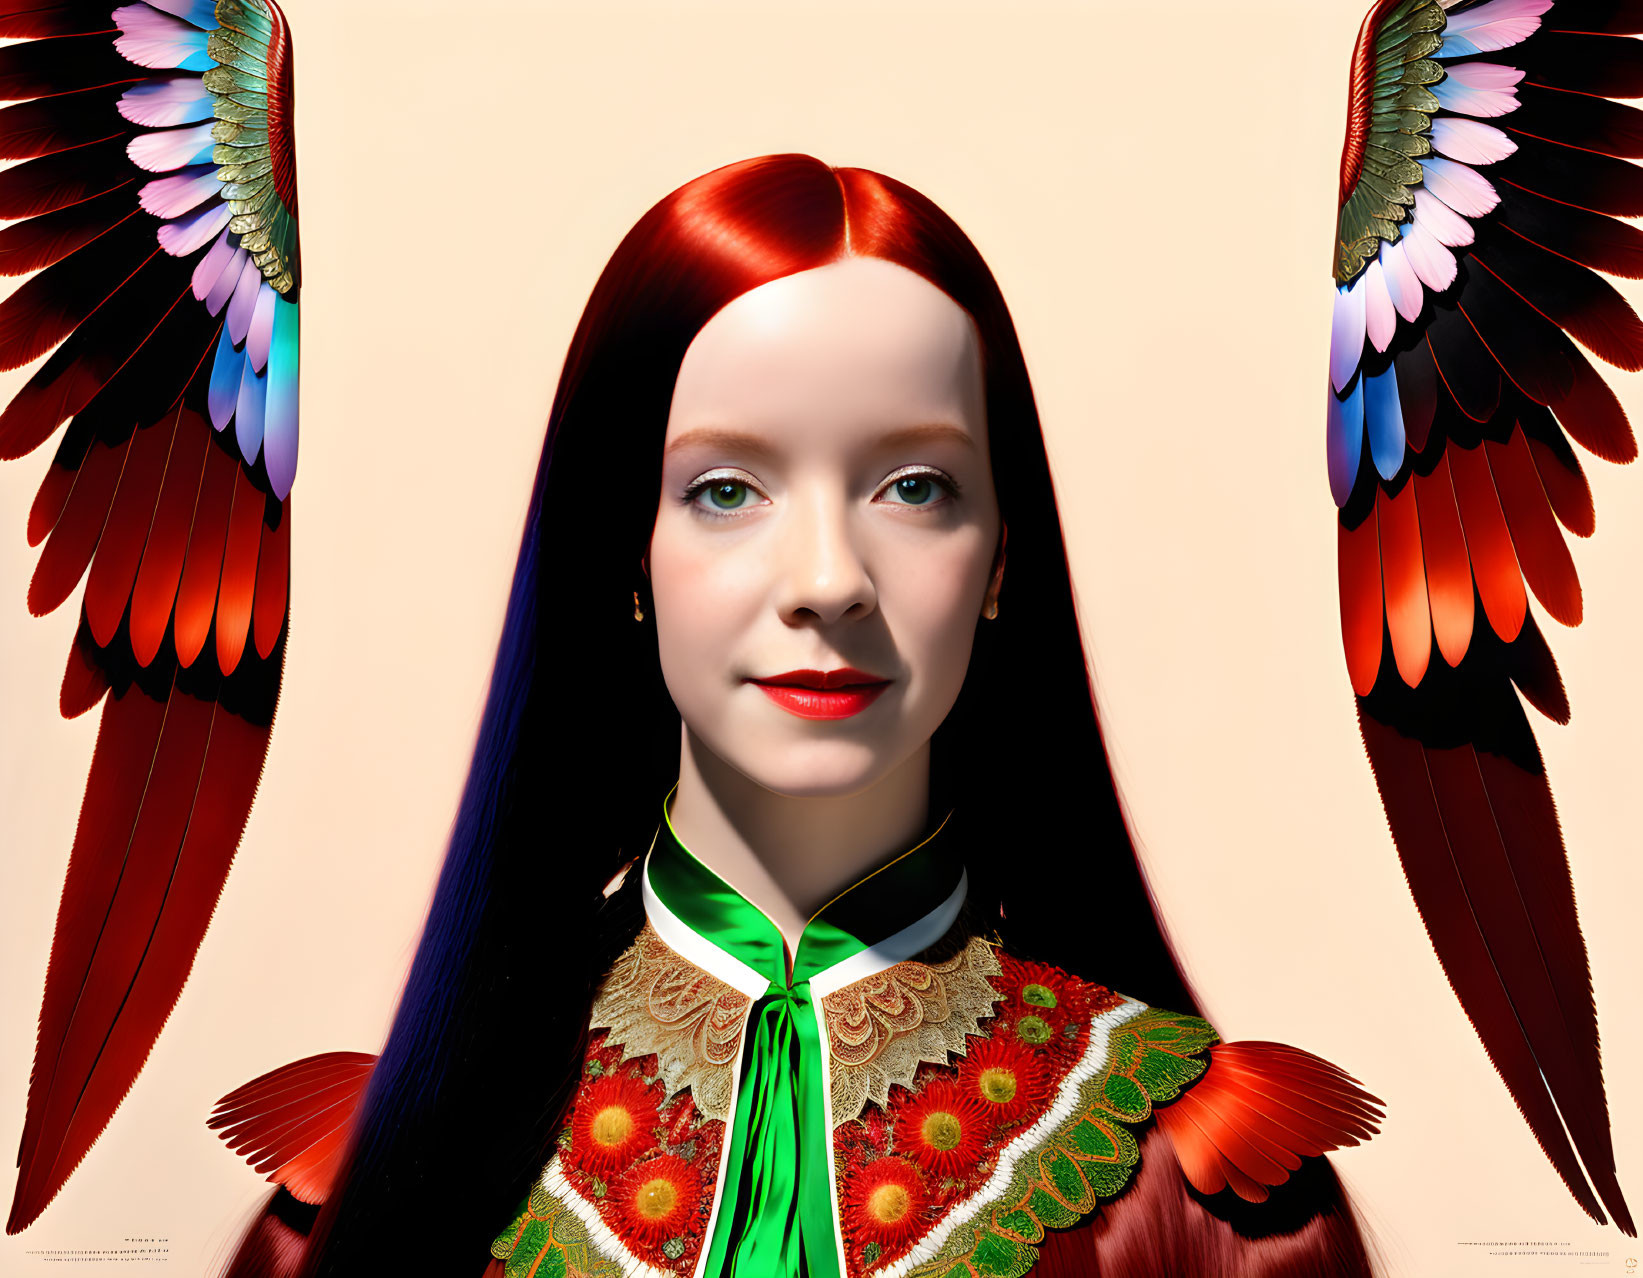 Digital illustration of woman with red hair, green eyes, and multicolored wings